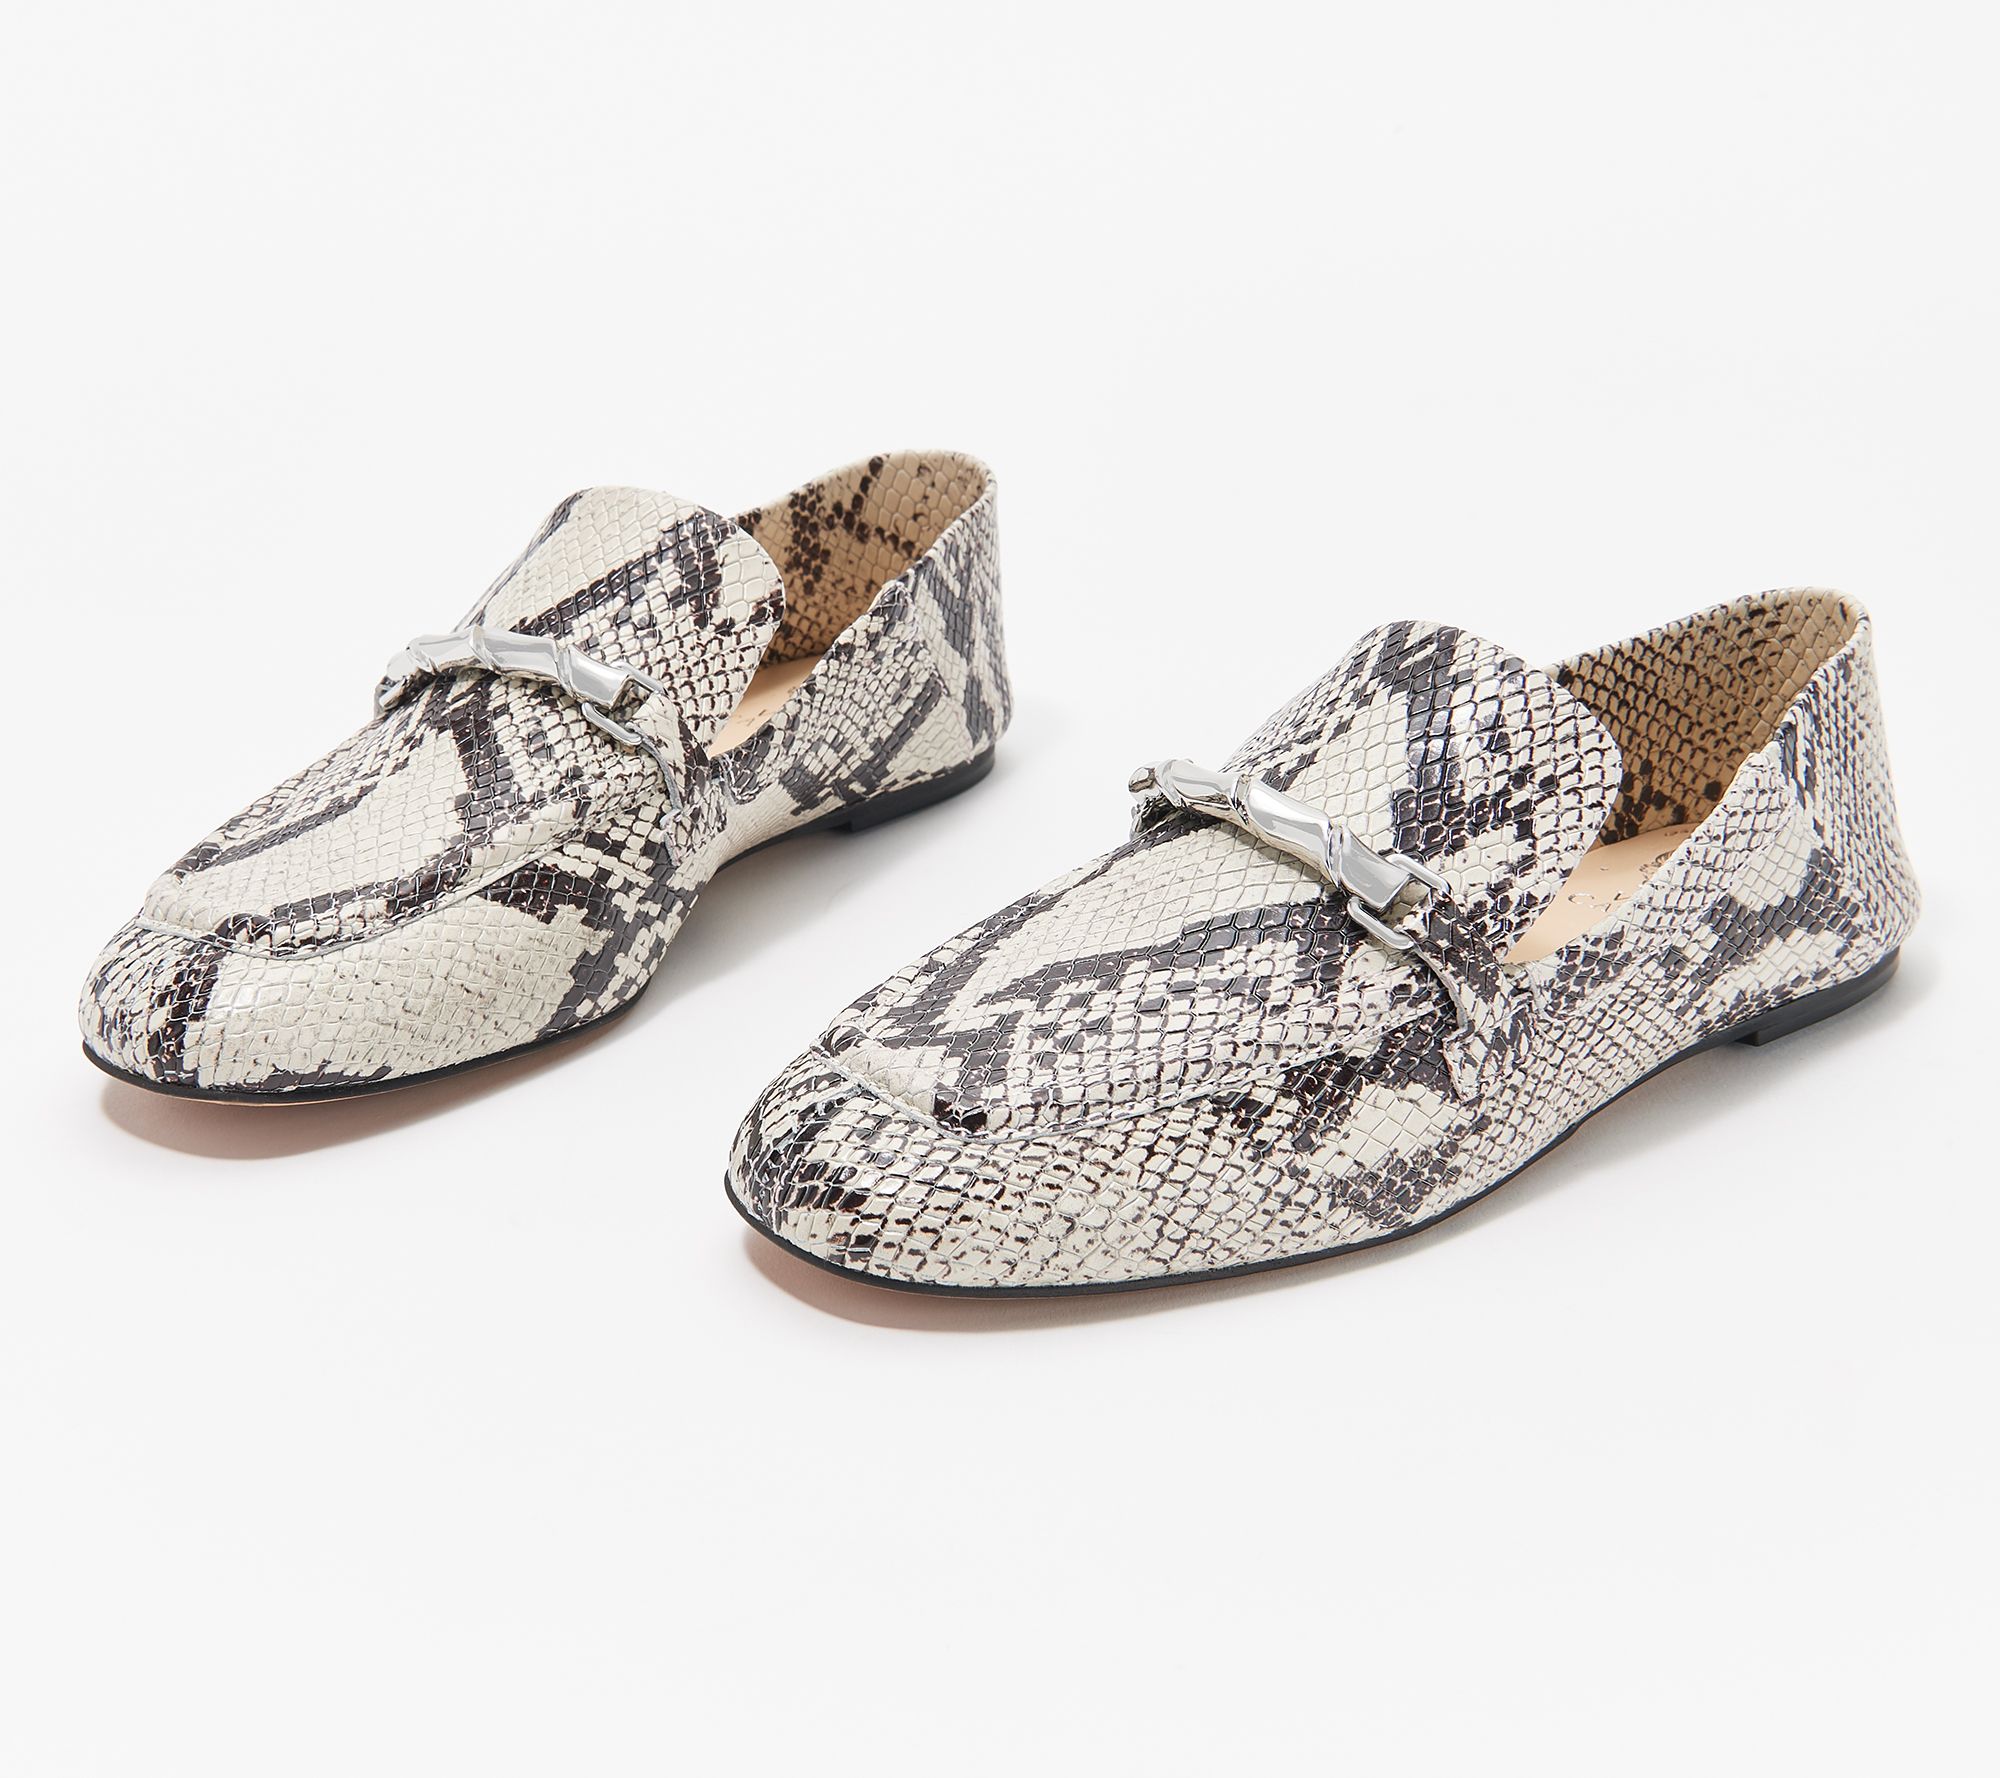 Vince Camuto Leather Slip-On Loafers - Perenna - QVC.com